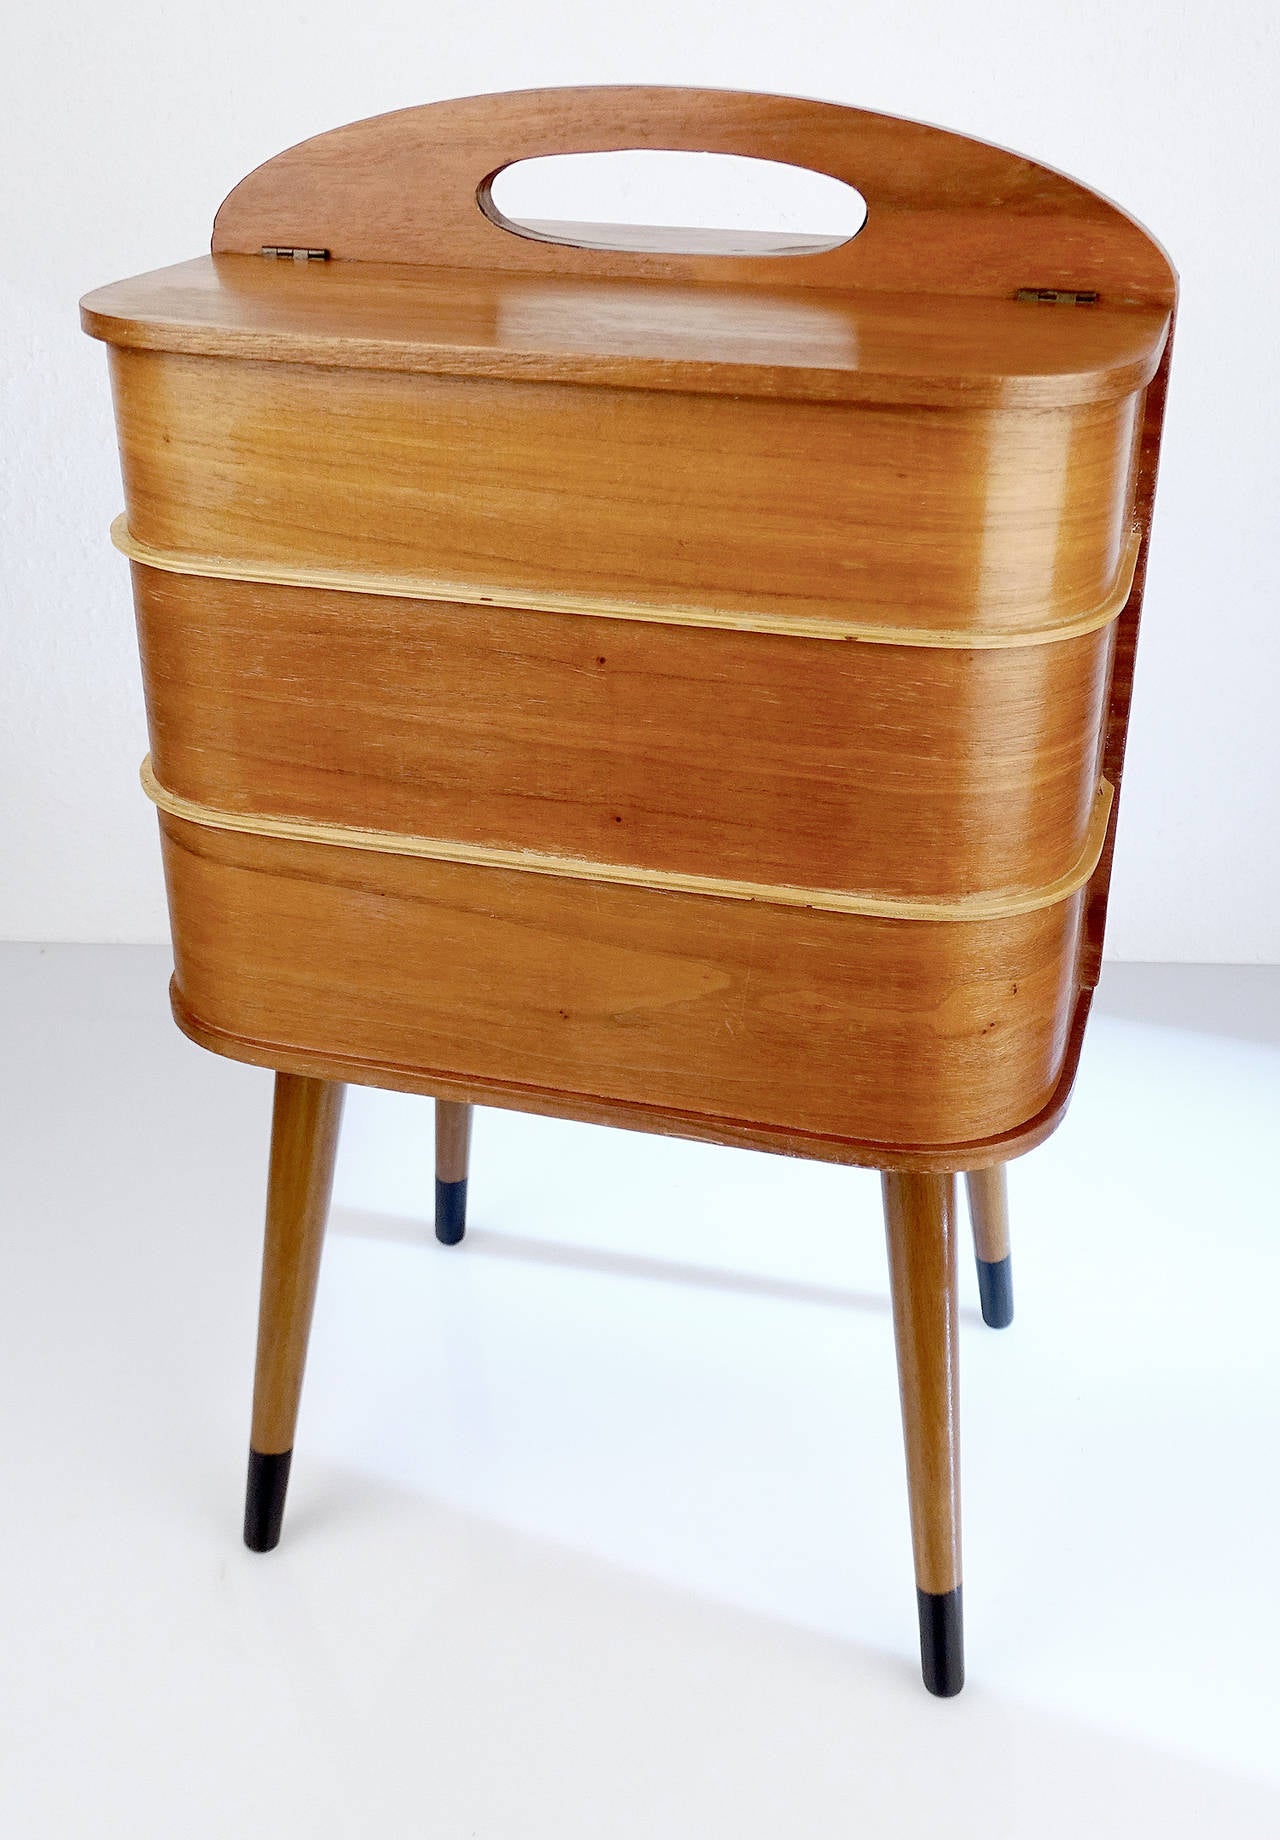 Mid-20th Century Danish Portable Sewing Box Vanity Side Table with Revolving Drawers